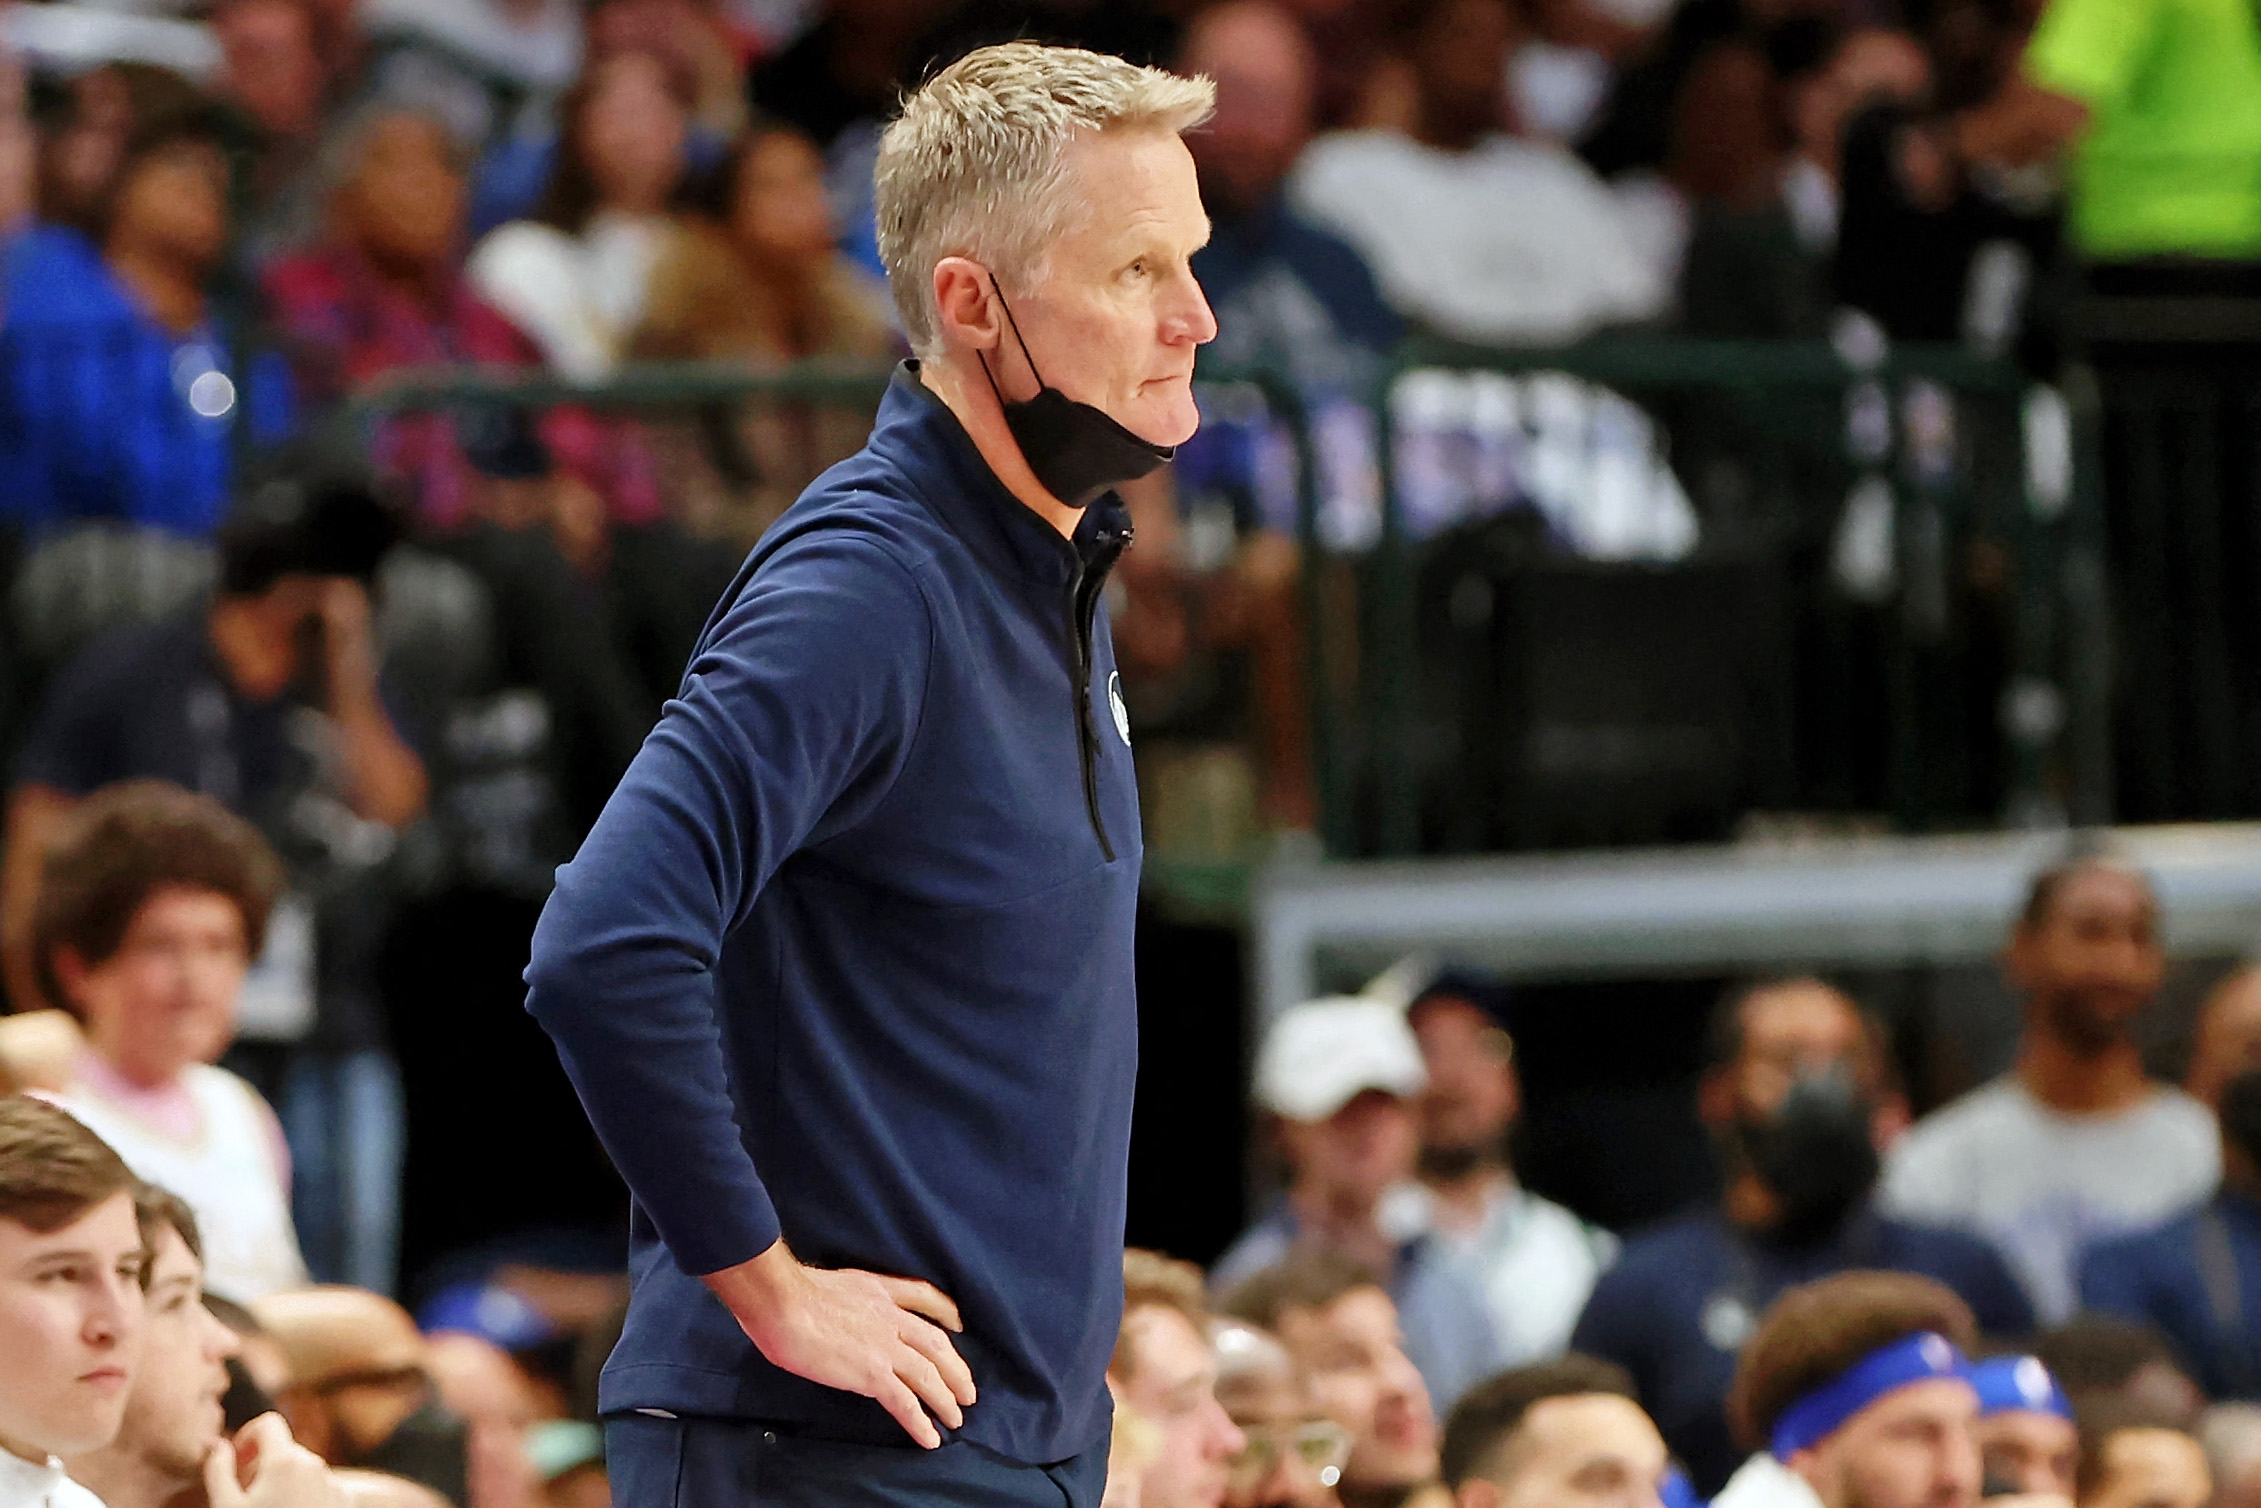 May 24, 2022; Dallas, Texas, USA; Golden State Warriors head coach Steve Kerr watches his team play against the Dallas Mavericks during the first quarter in game four of the 2022 Western Conference finals at American Airlines Center. Mandatory Credit: Kevin Jairaj-USA TODAY Sports